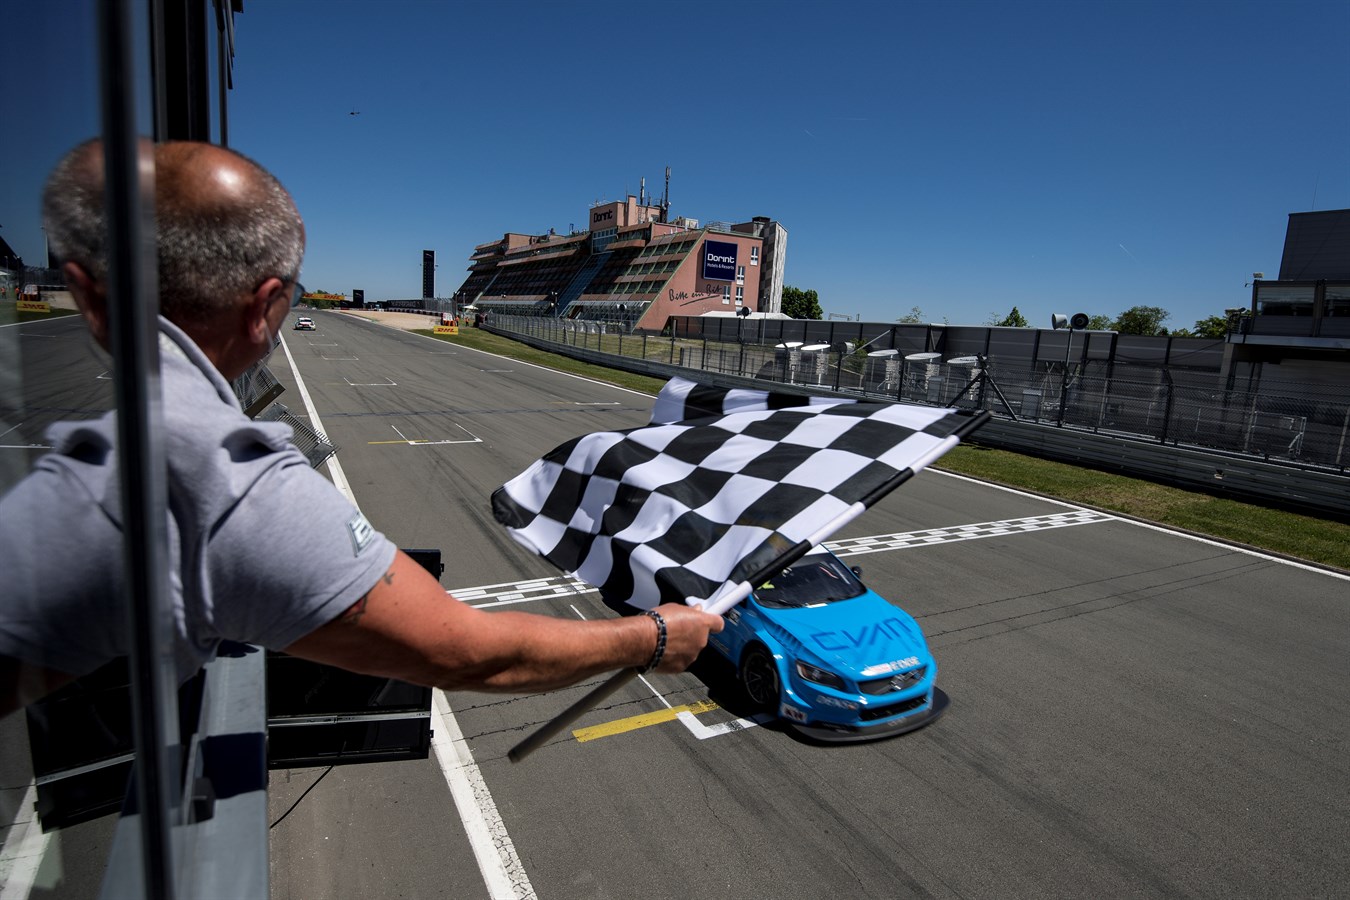 Historic double victory and World Championship lead at the Nürburgring